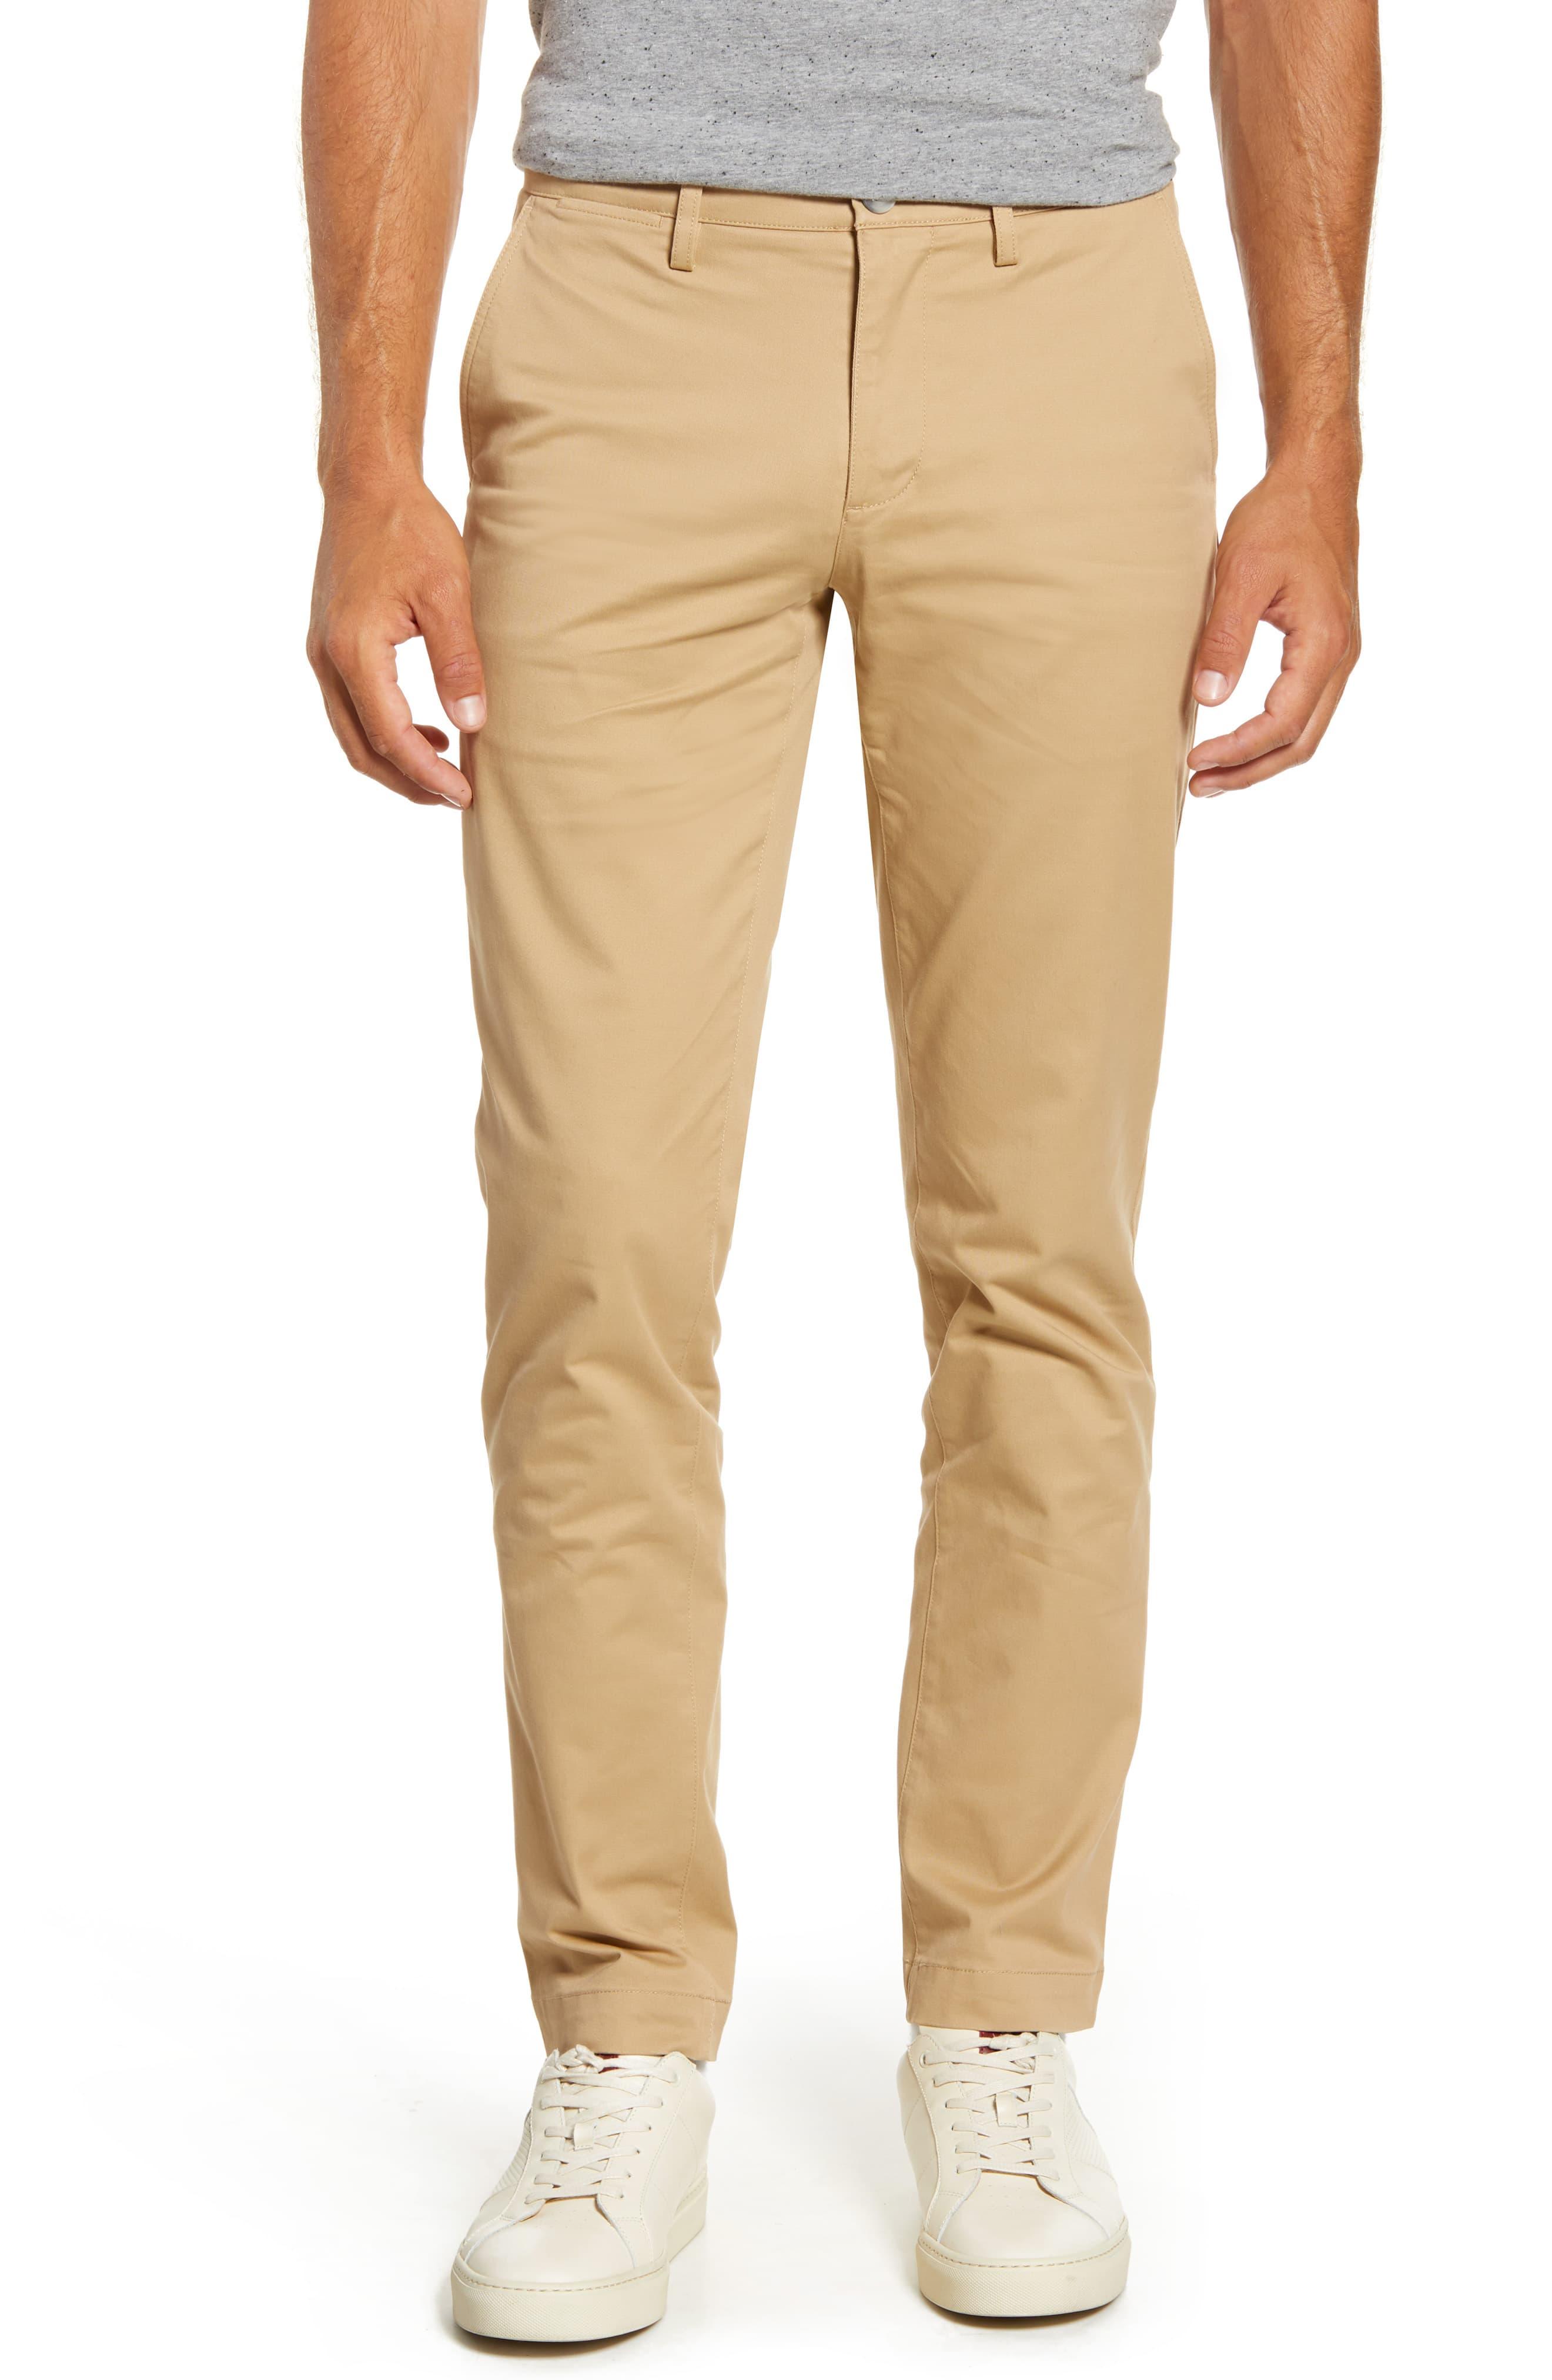 Lacoste Cotton Slim Fit Chinos in Natural for Men - Save 51% - Lyst